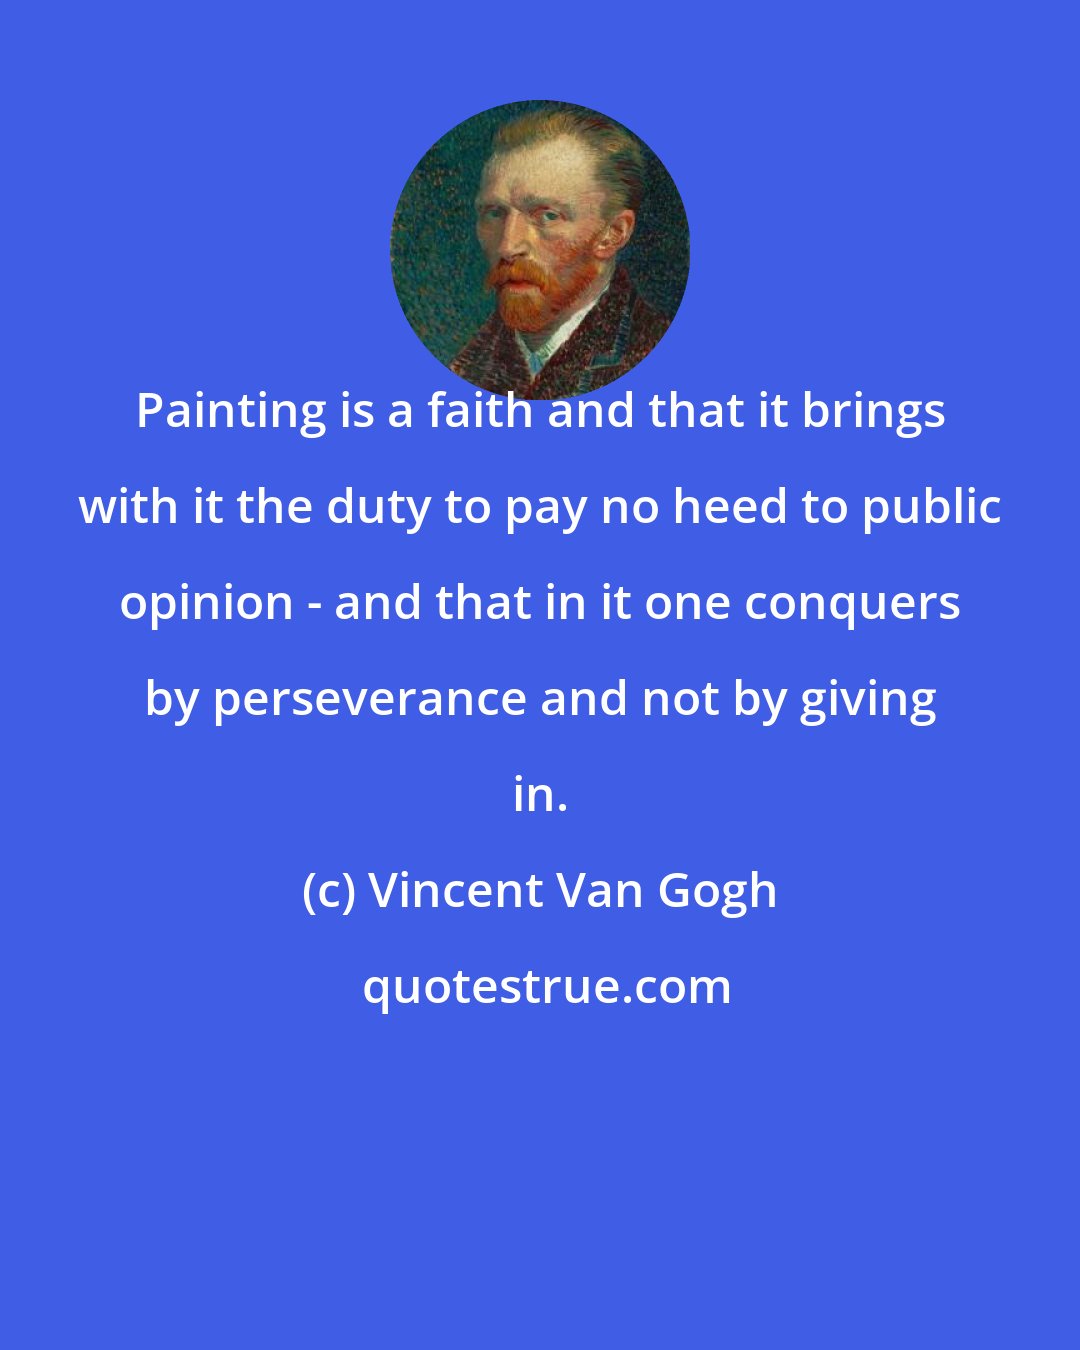 Vincent Van Gogh: Painting is a faith and that it brings with it the duty to pay no heed to public opinion - and that in it one conquers by perseverance and not by giving in.